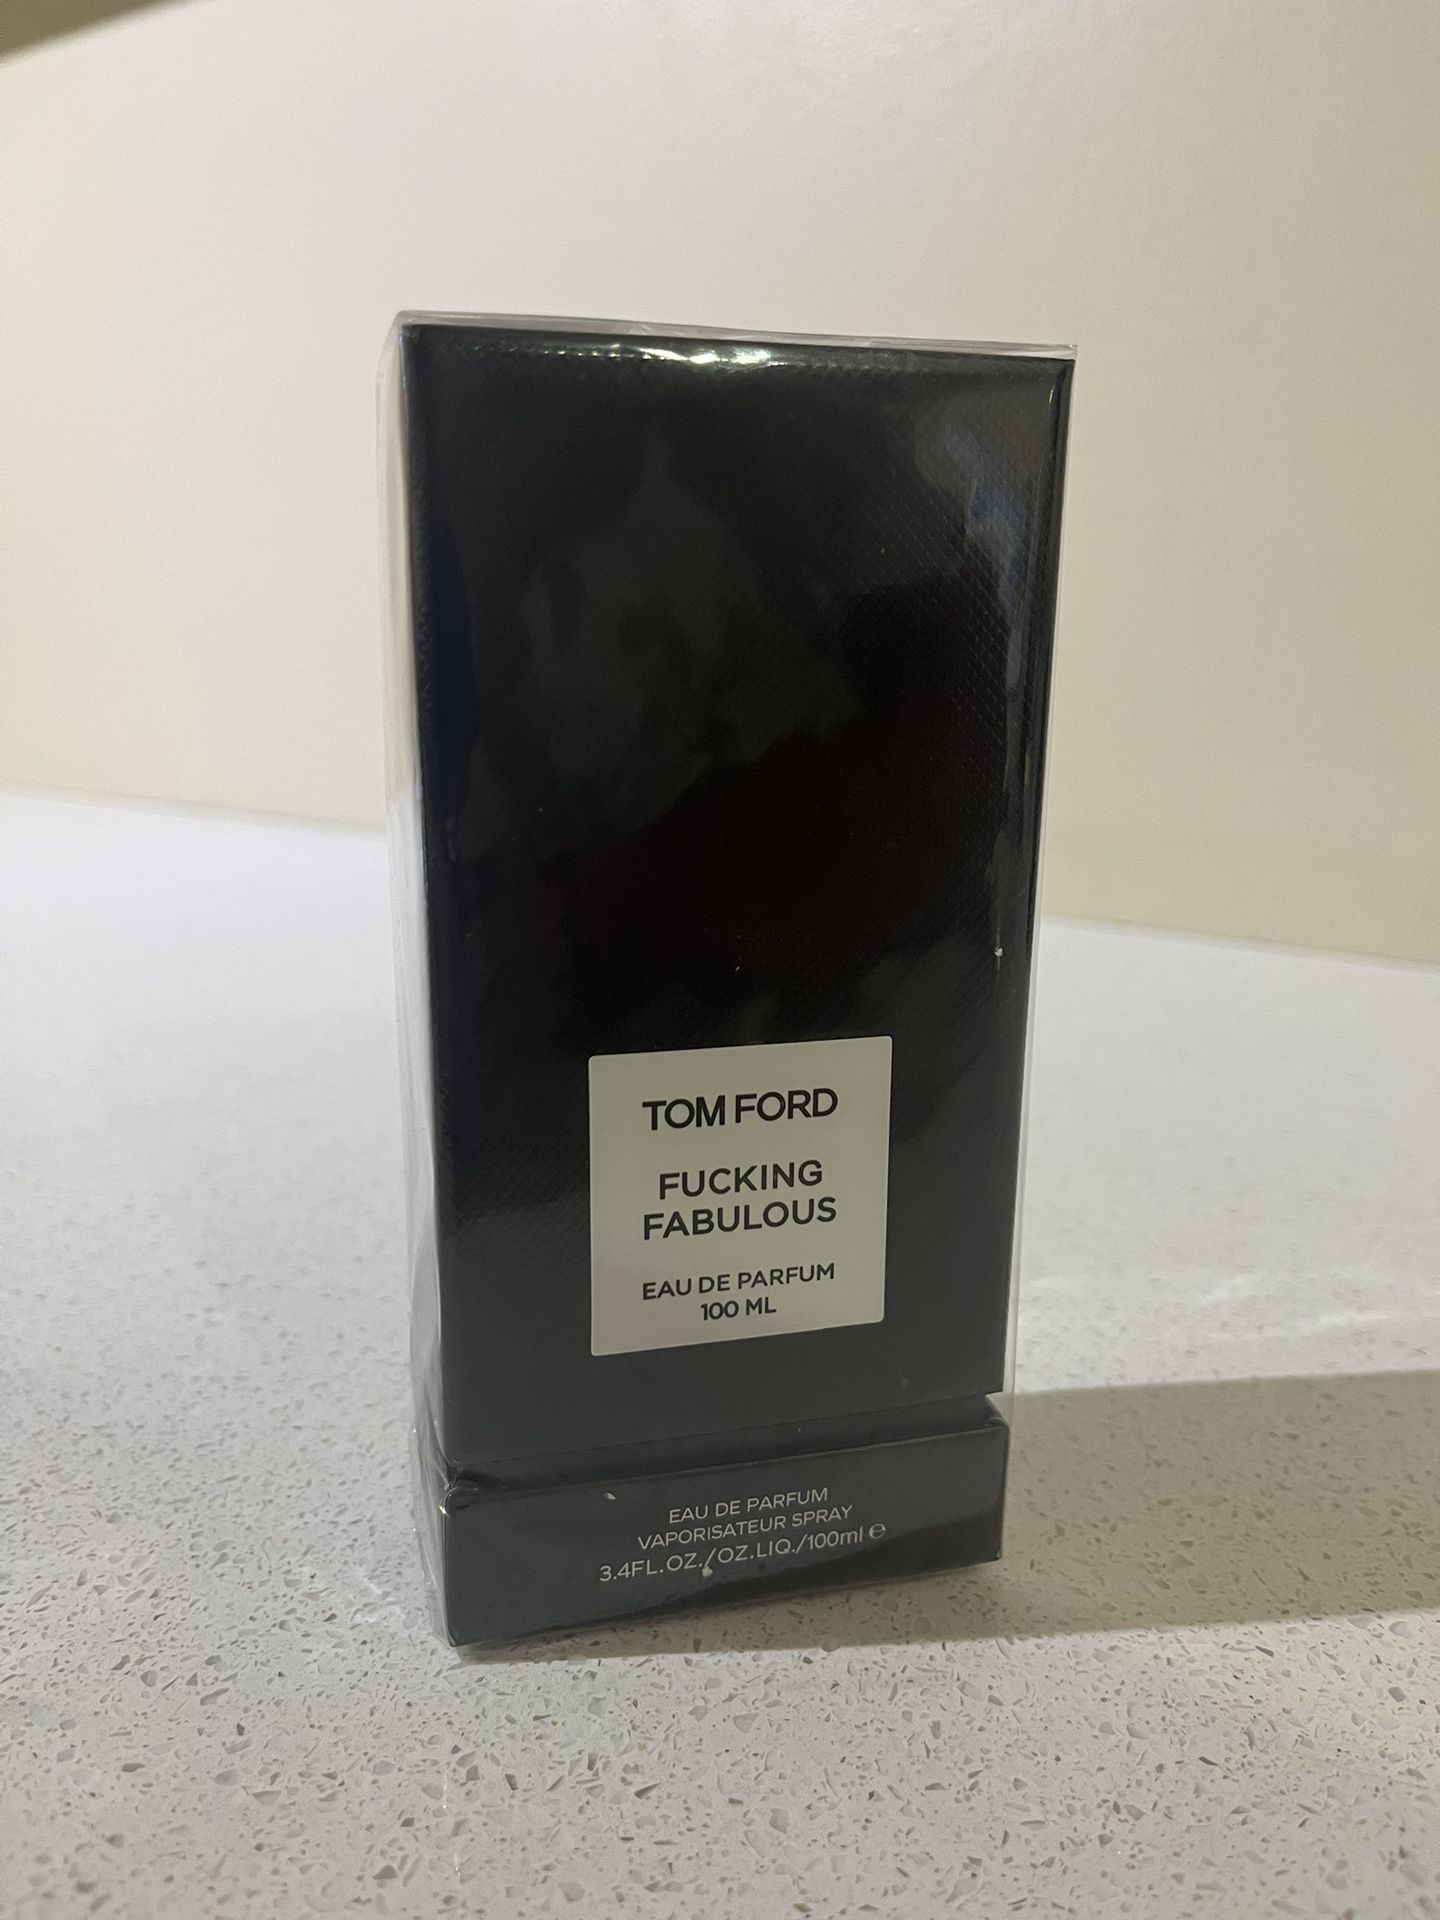 Tom Ford “Fucking fabulous” Cologne Brand New Unopened 